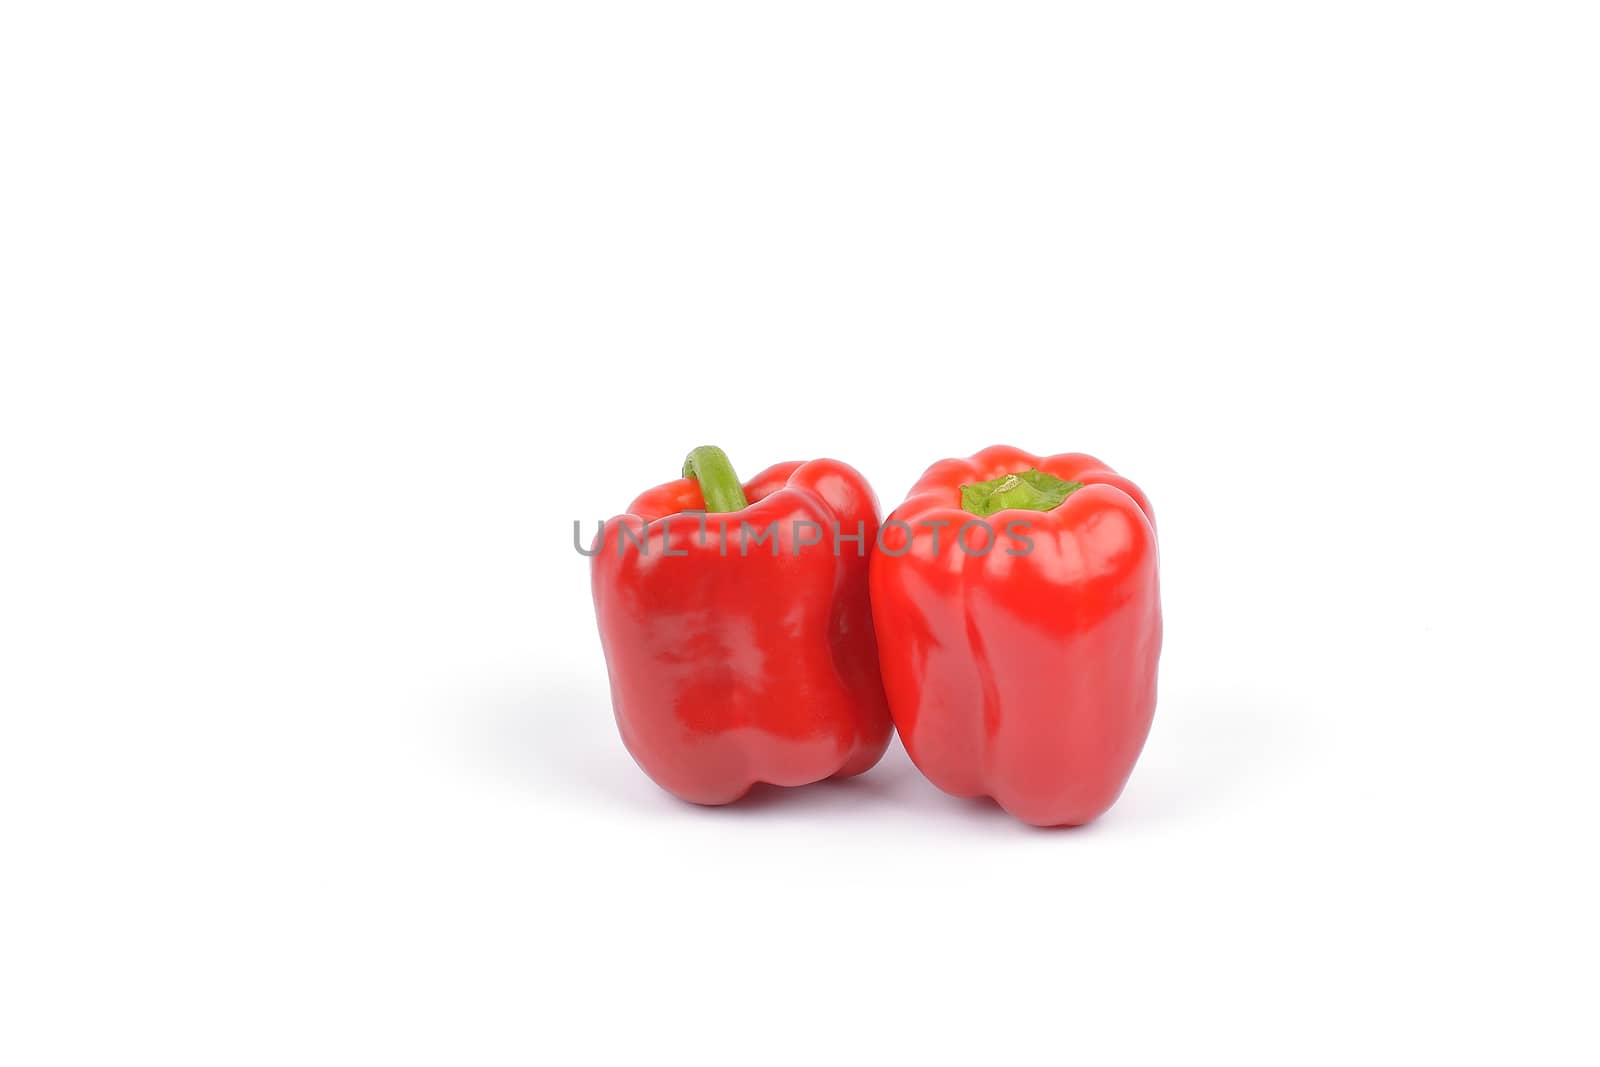 peppers or capsicum on white background by constantinhurghea